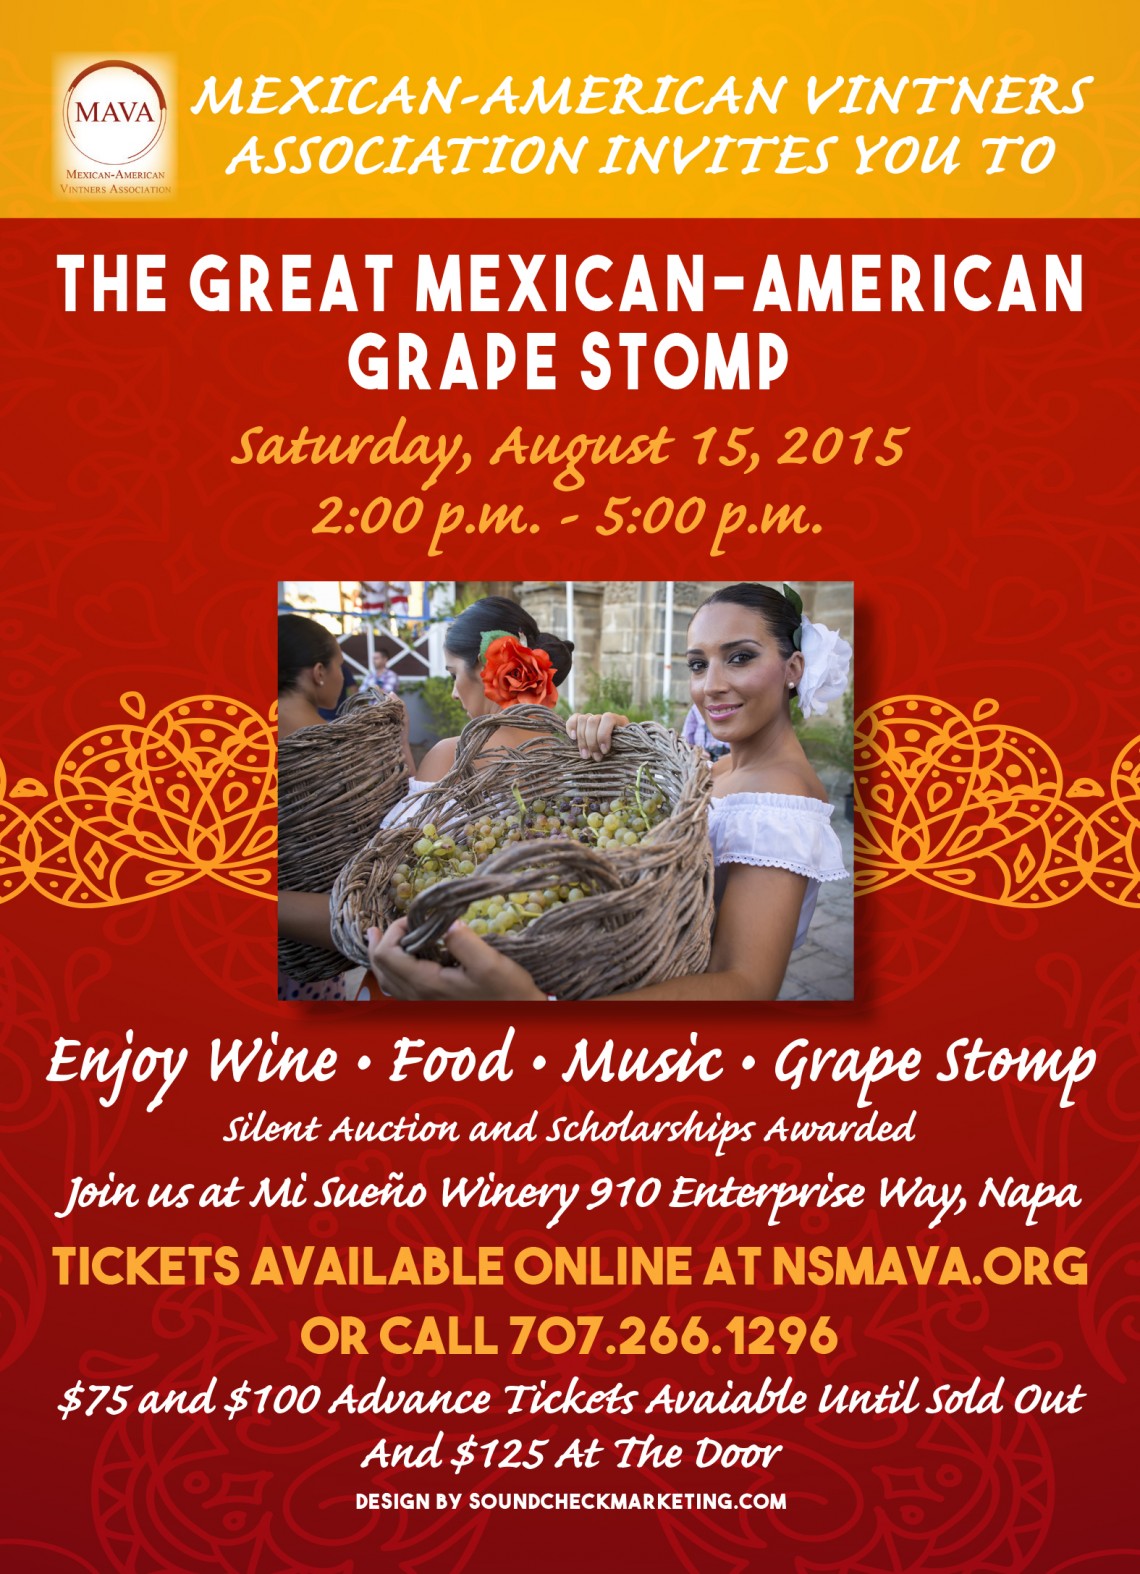 The Great Mexican-American Grape Stomp